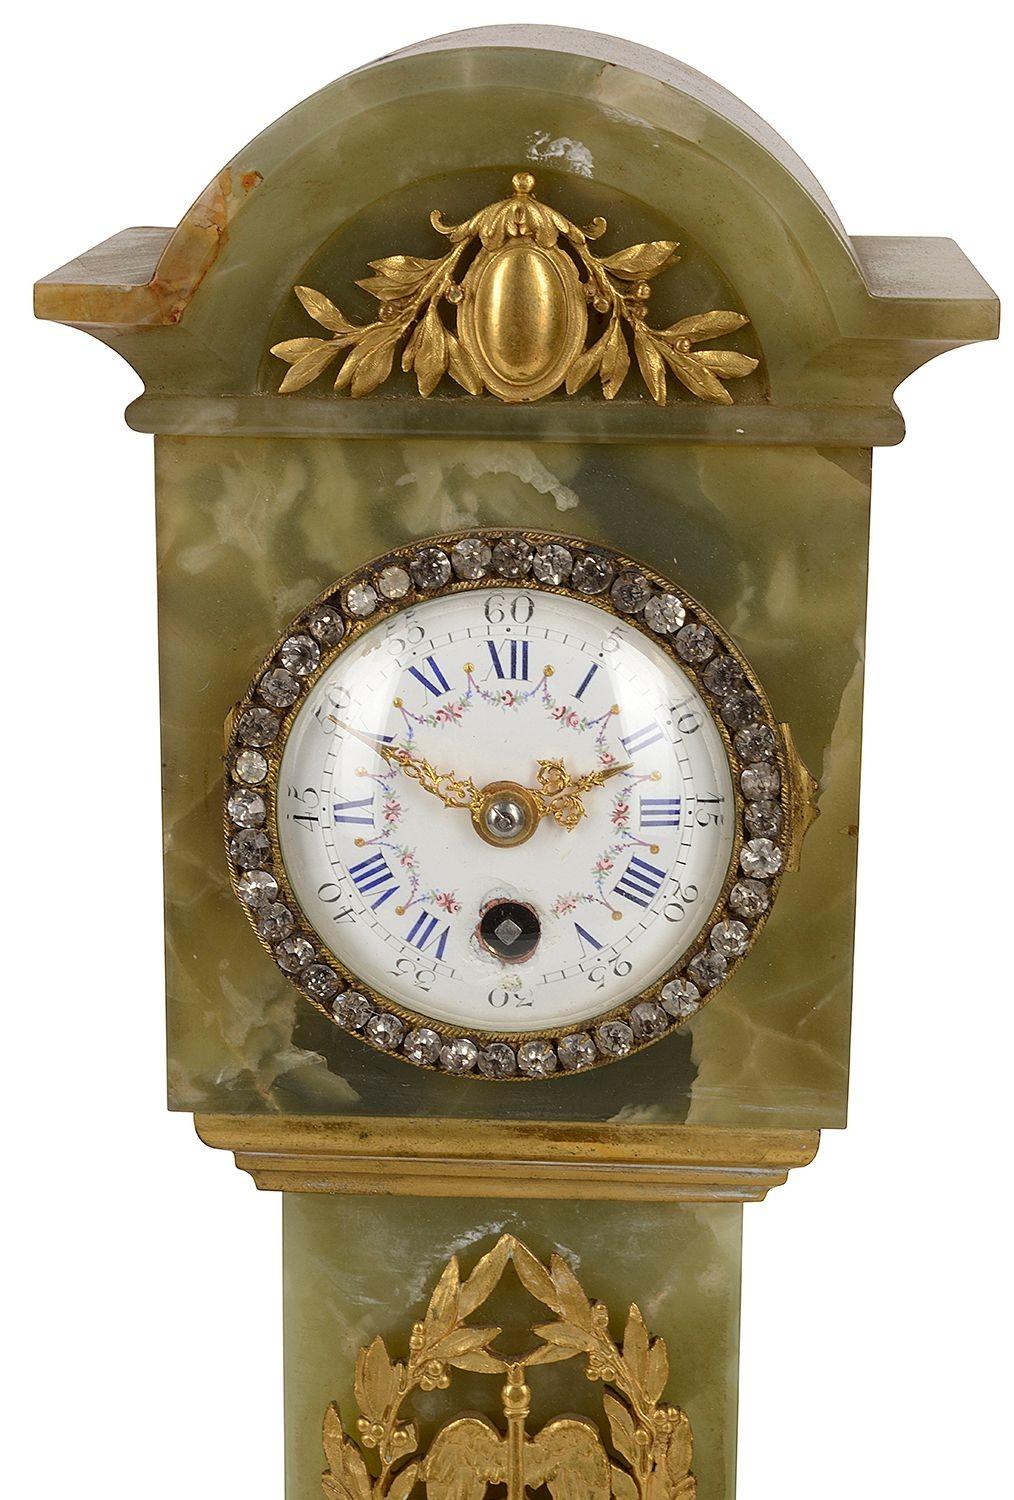 An unusual late 19th Century French minature gilded ormolu and carved Onyx mantle clock, in the style of a Louis XVI longcase clock. Having an enamel clock face and classical mounts.
 
Batch 65 CHEYN 57005.